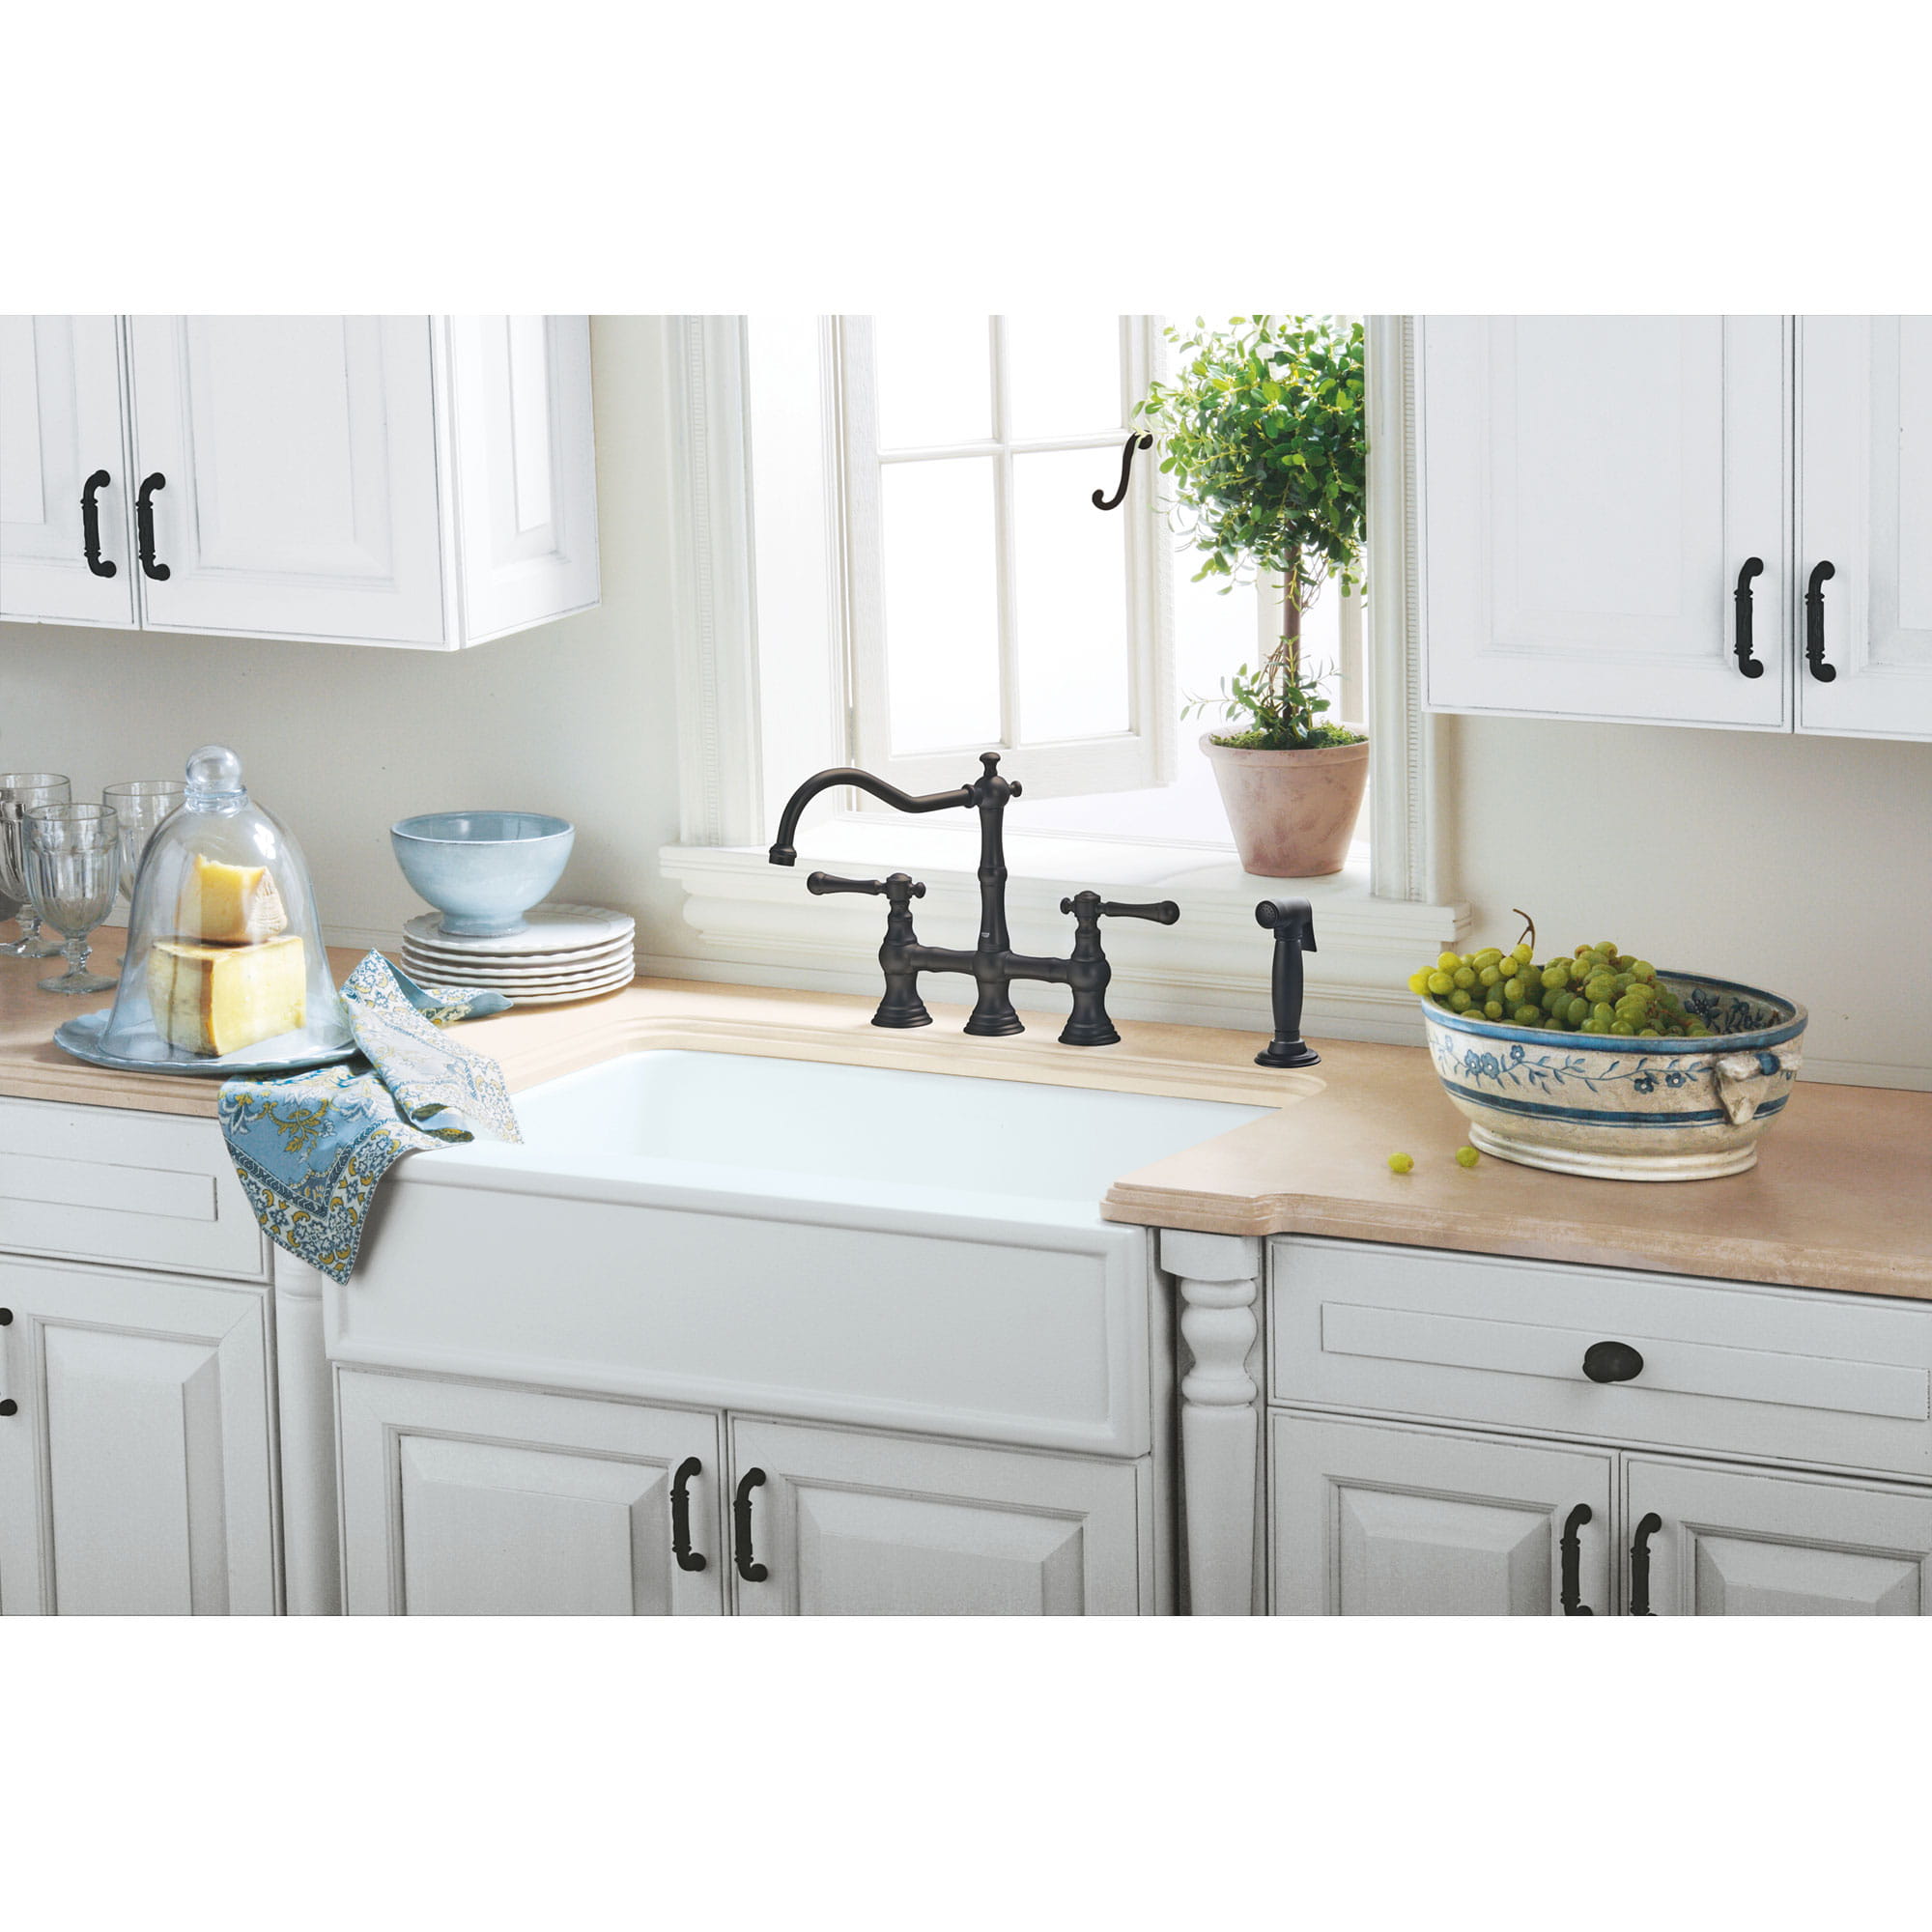 2-Handle Kitchen Faucet 2.2 GPM with Side Spray